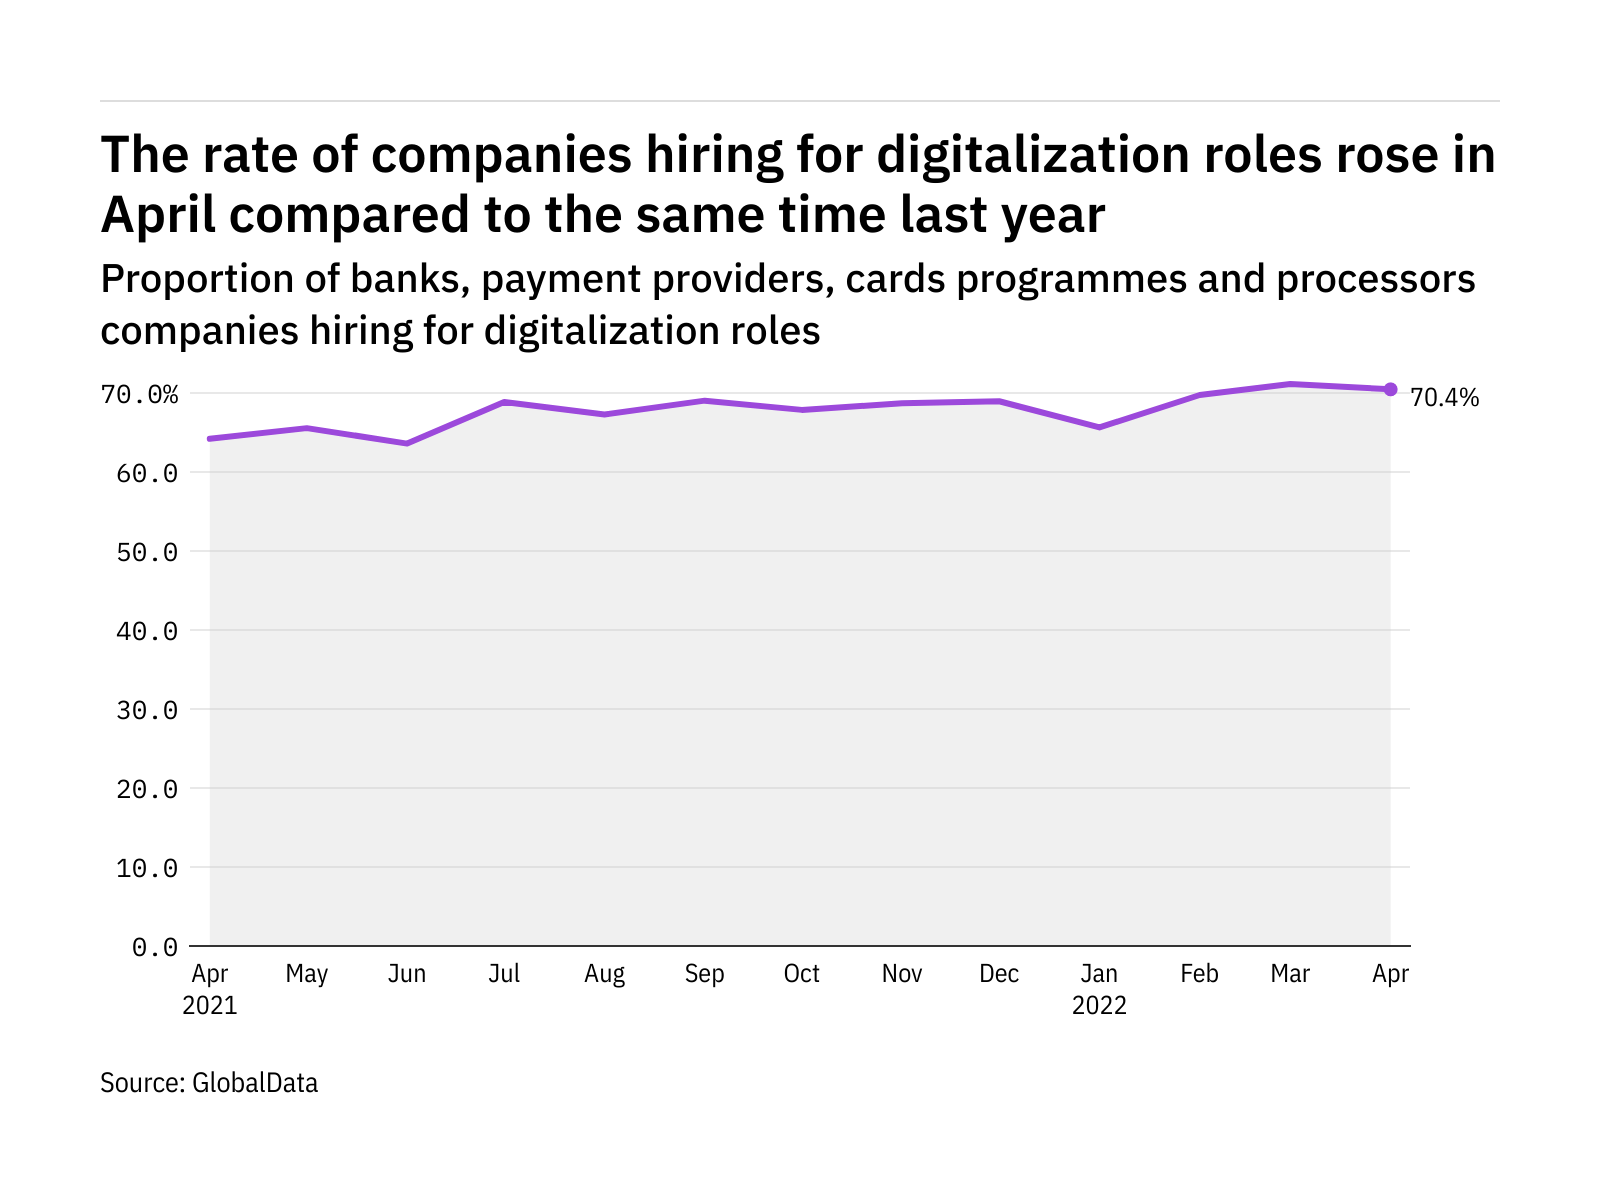 Digitalization hiring levels in the payment industry rose in April 2022